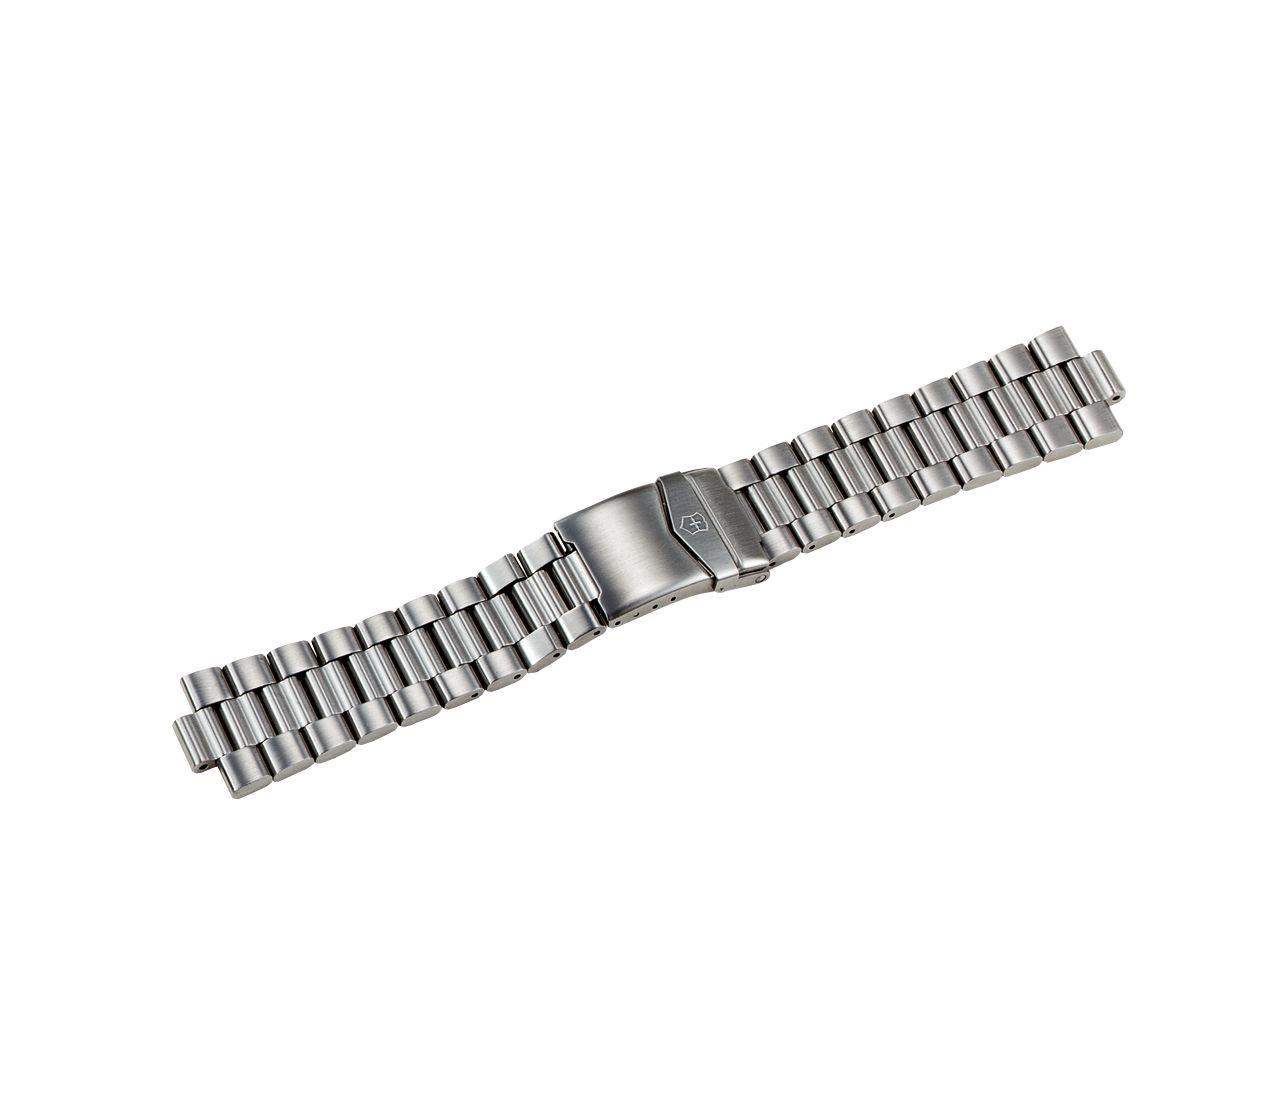 Victorinox Summit Stainless - mm - mm in - 000782 0 9.05 clasp Steel Bracelet Large with XLT